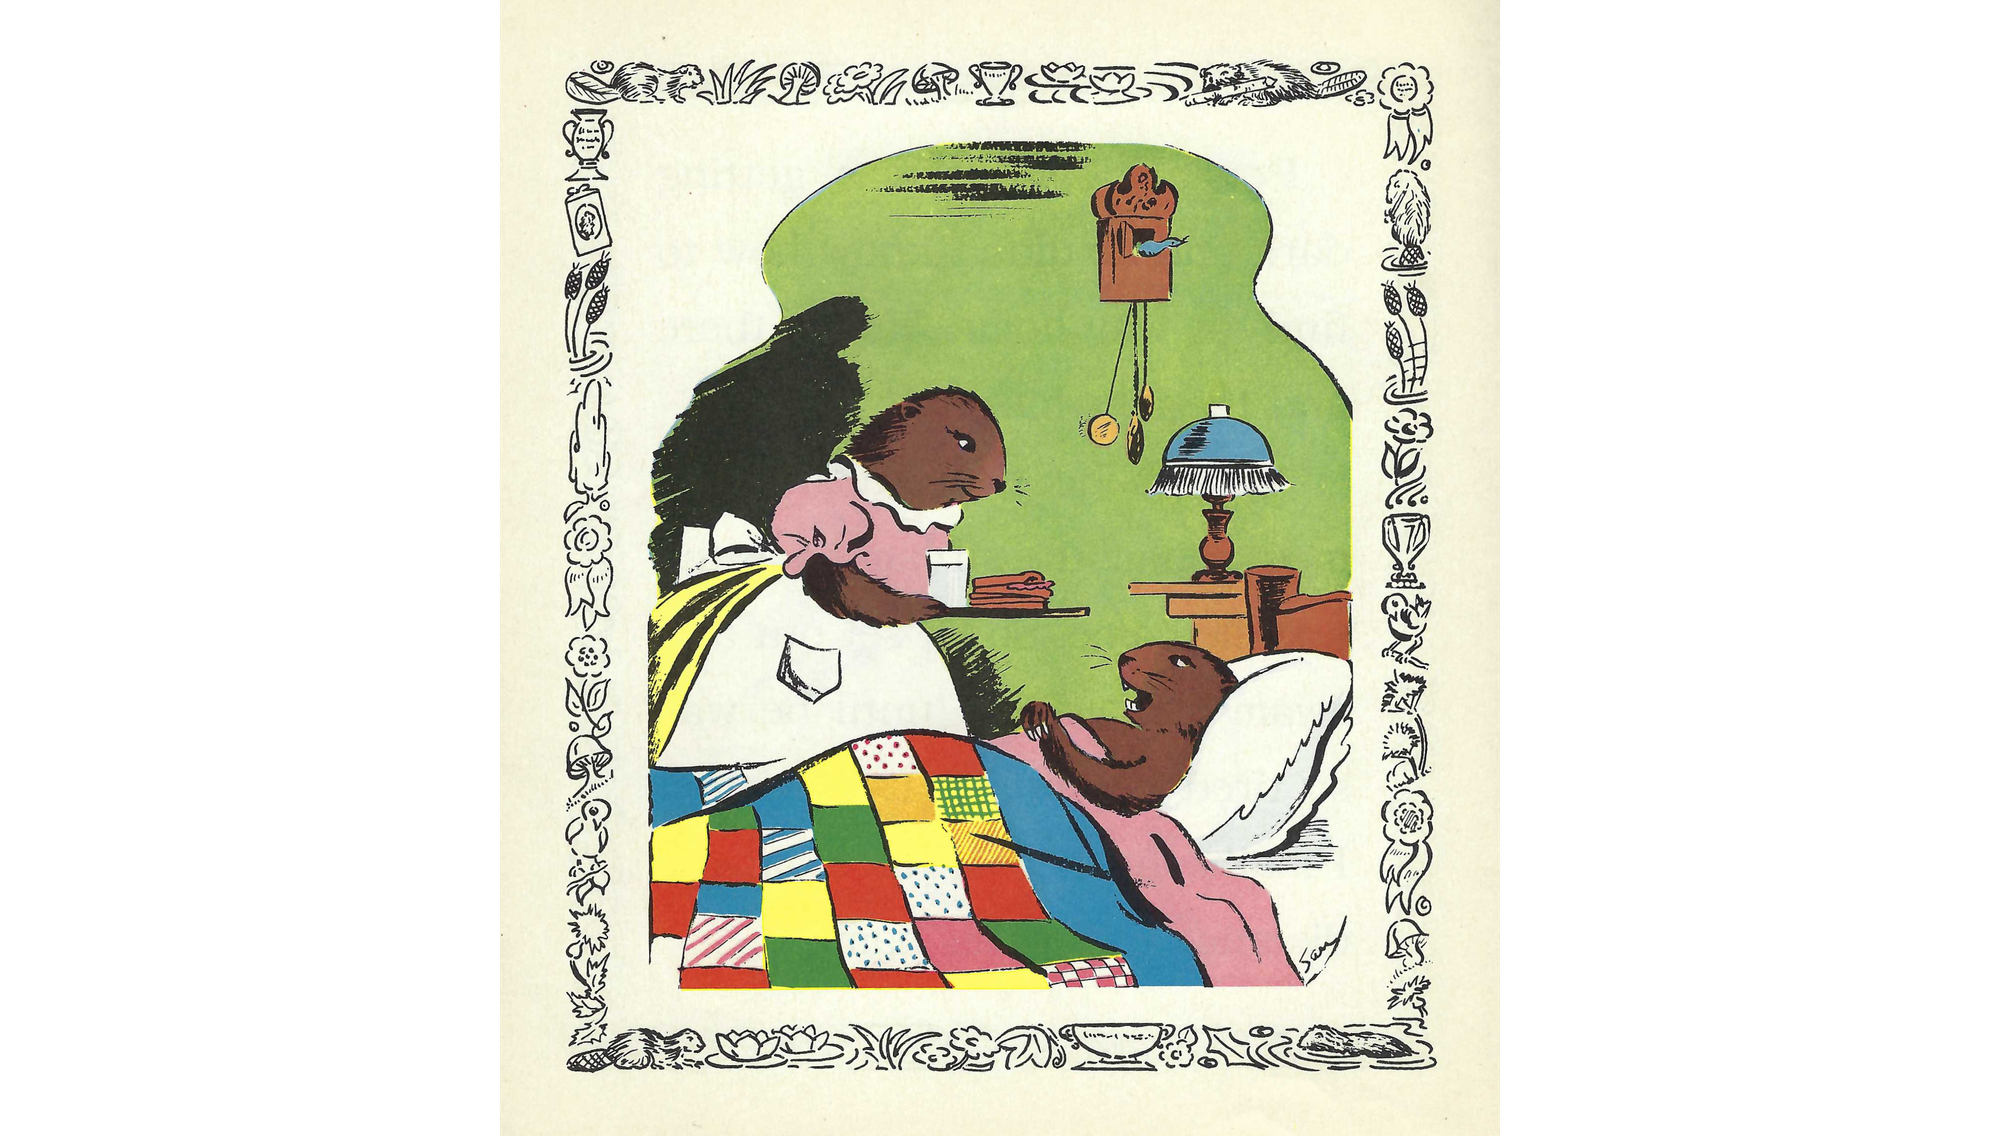 Illustration of beaver sick in bed with mother bringing milk and cookies on a tray